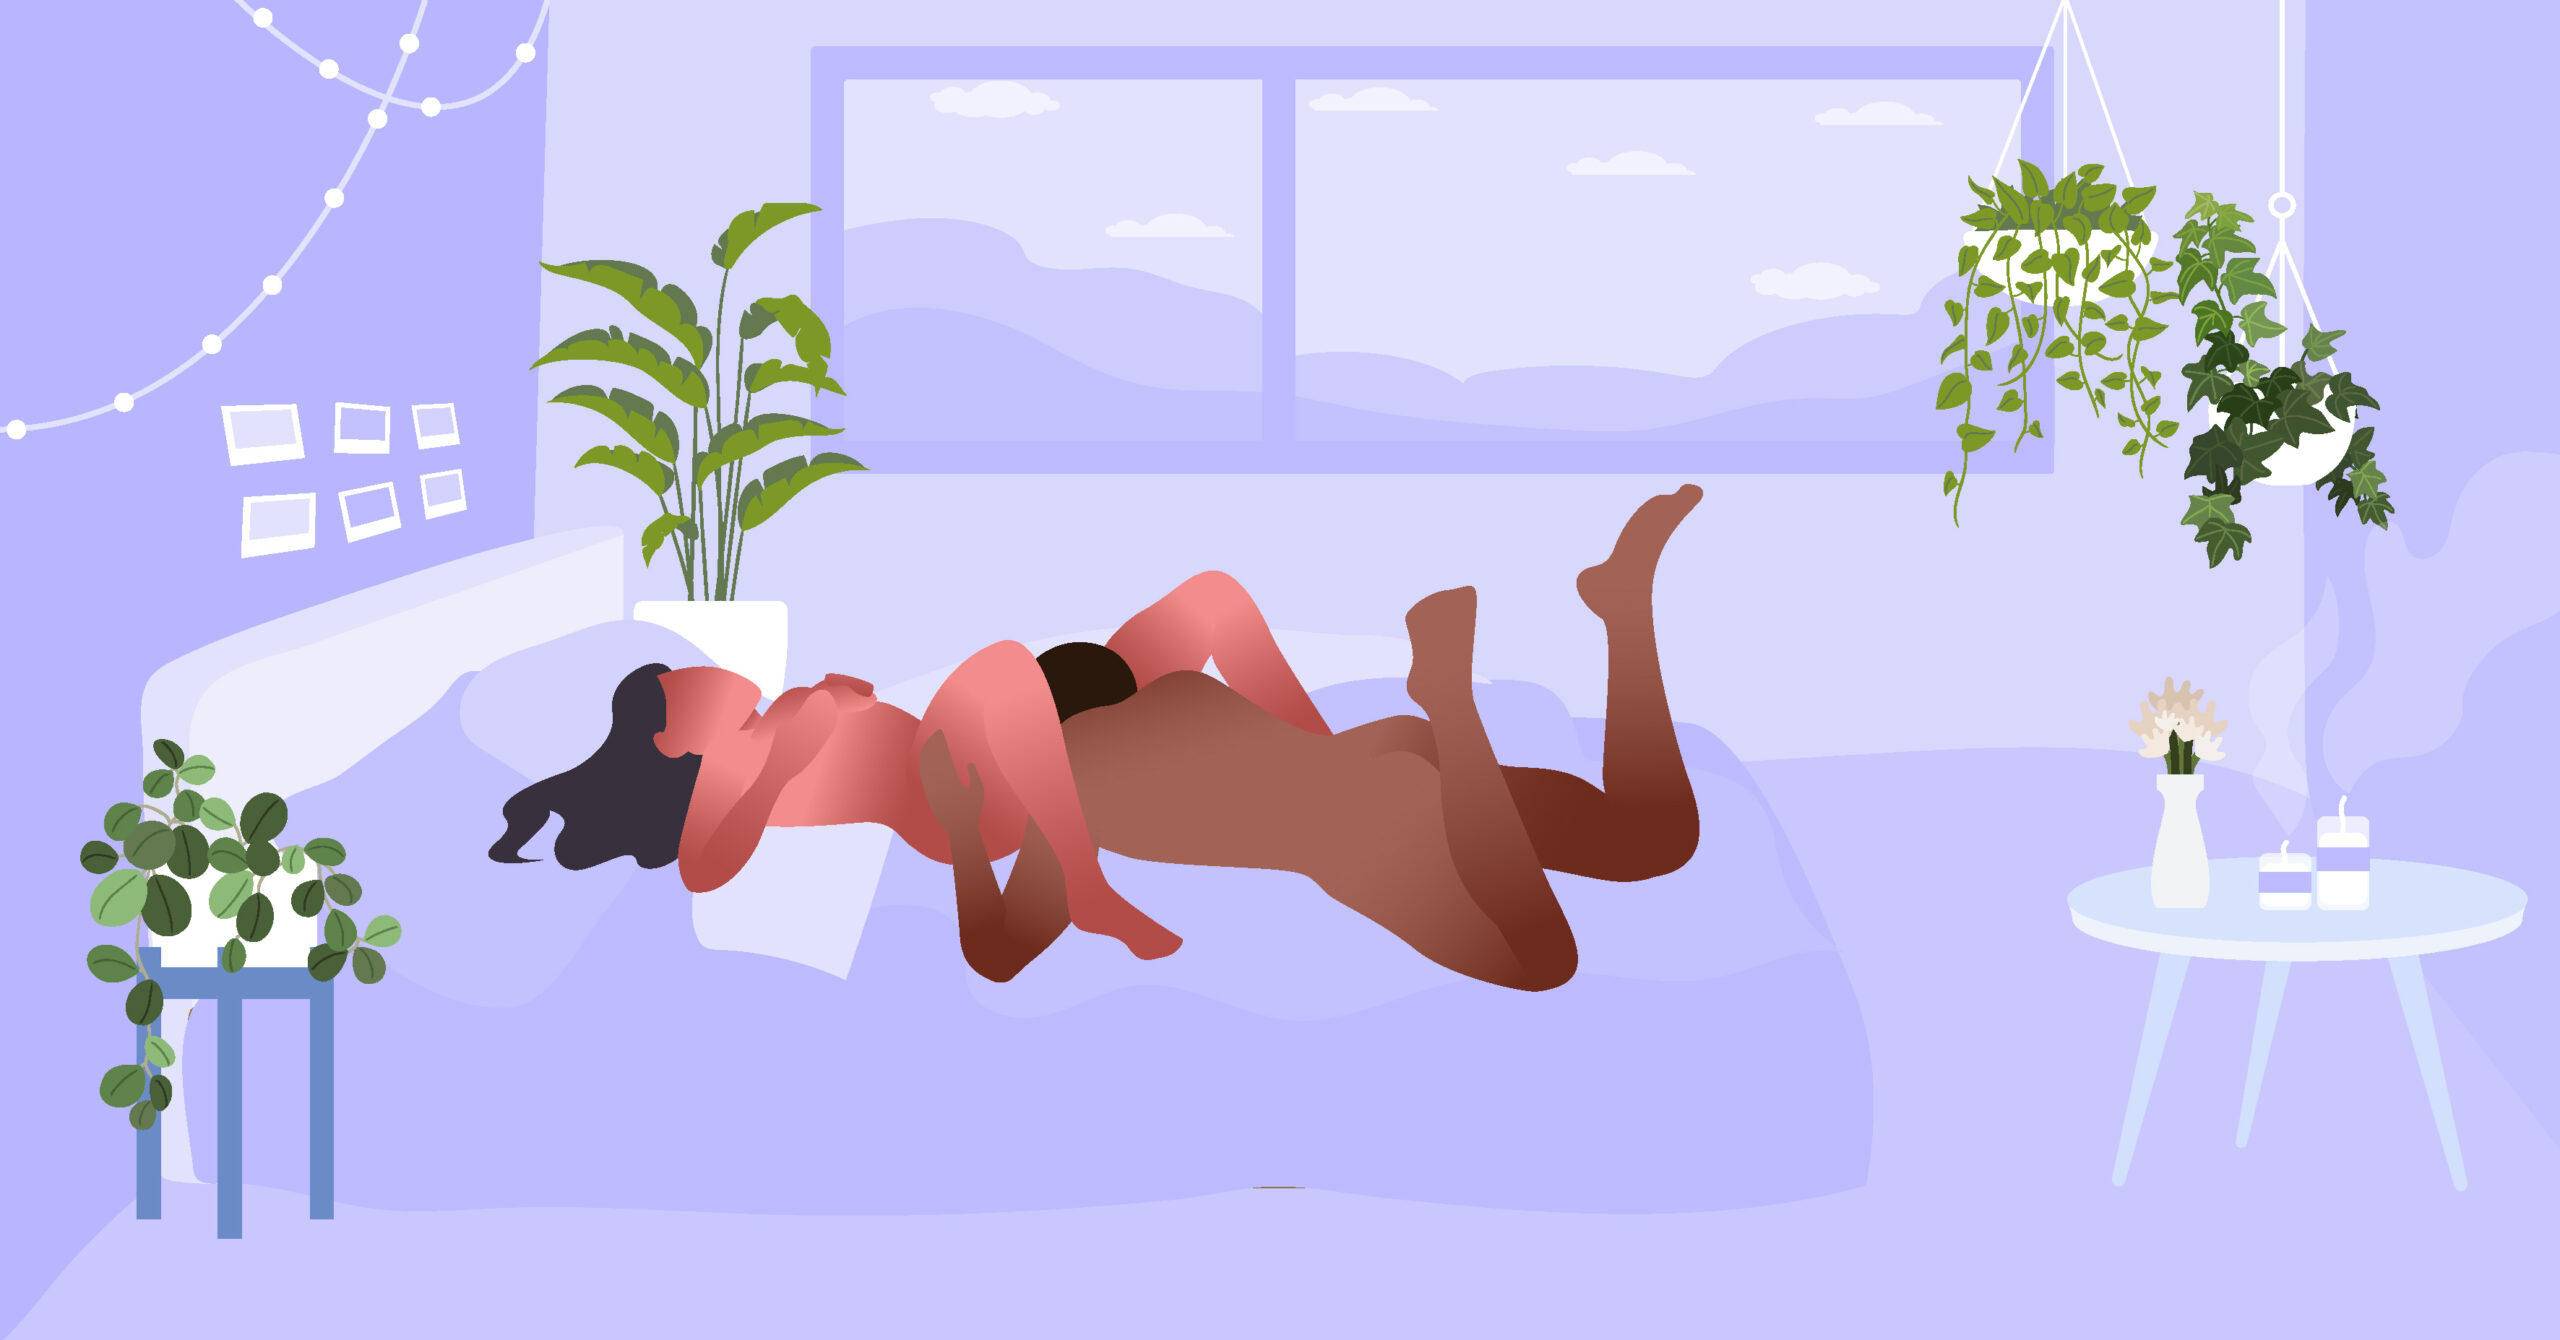 10 Best Sex Positions For Beginners: Going Back to Basics